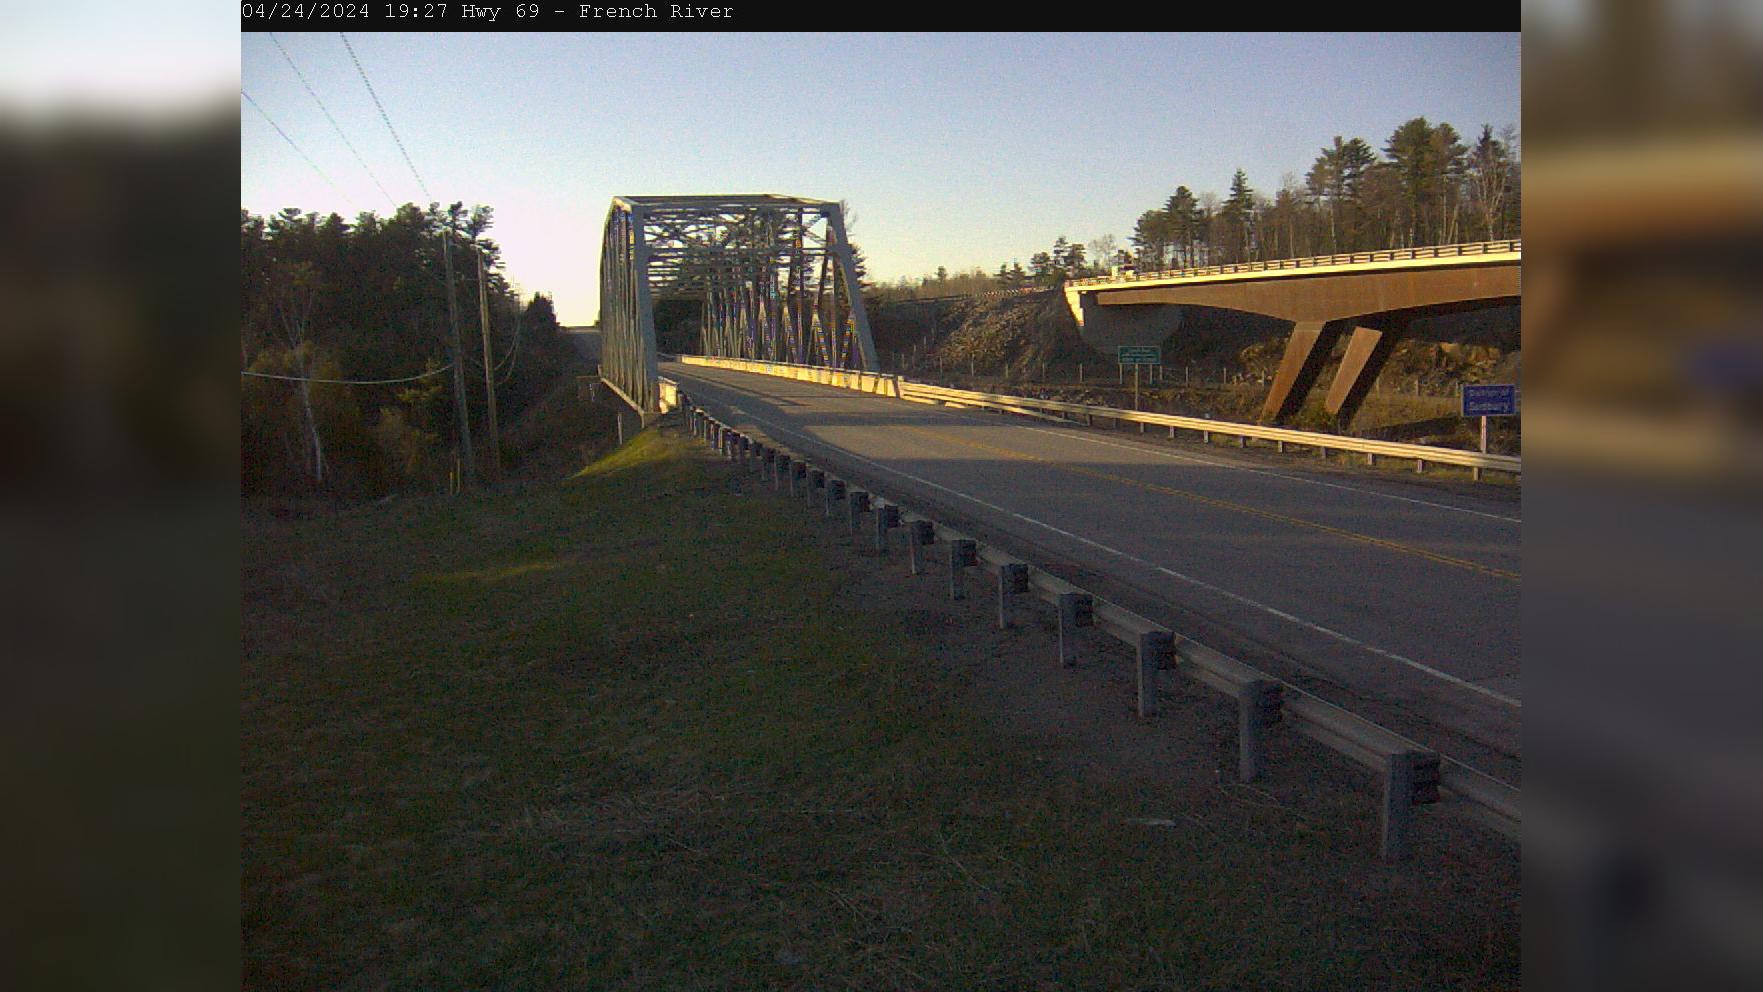 Unorganized Centre Parry Sound: Highway 69 near French River Br Traffic Camera